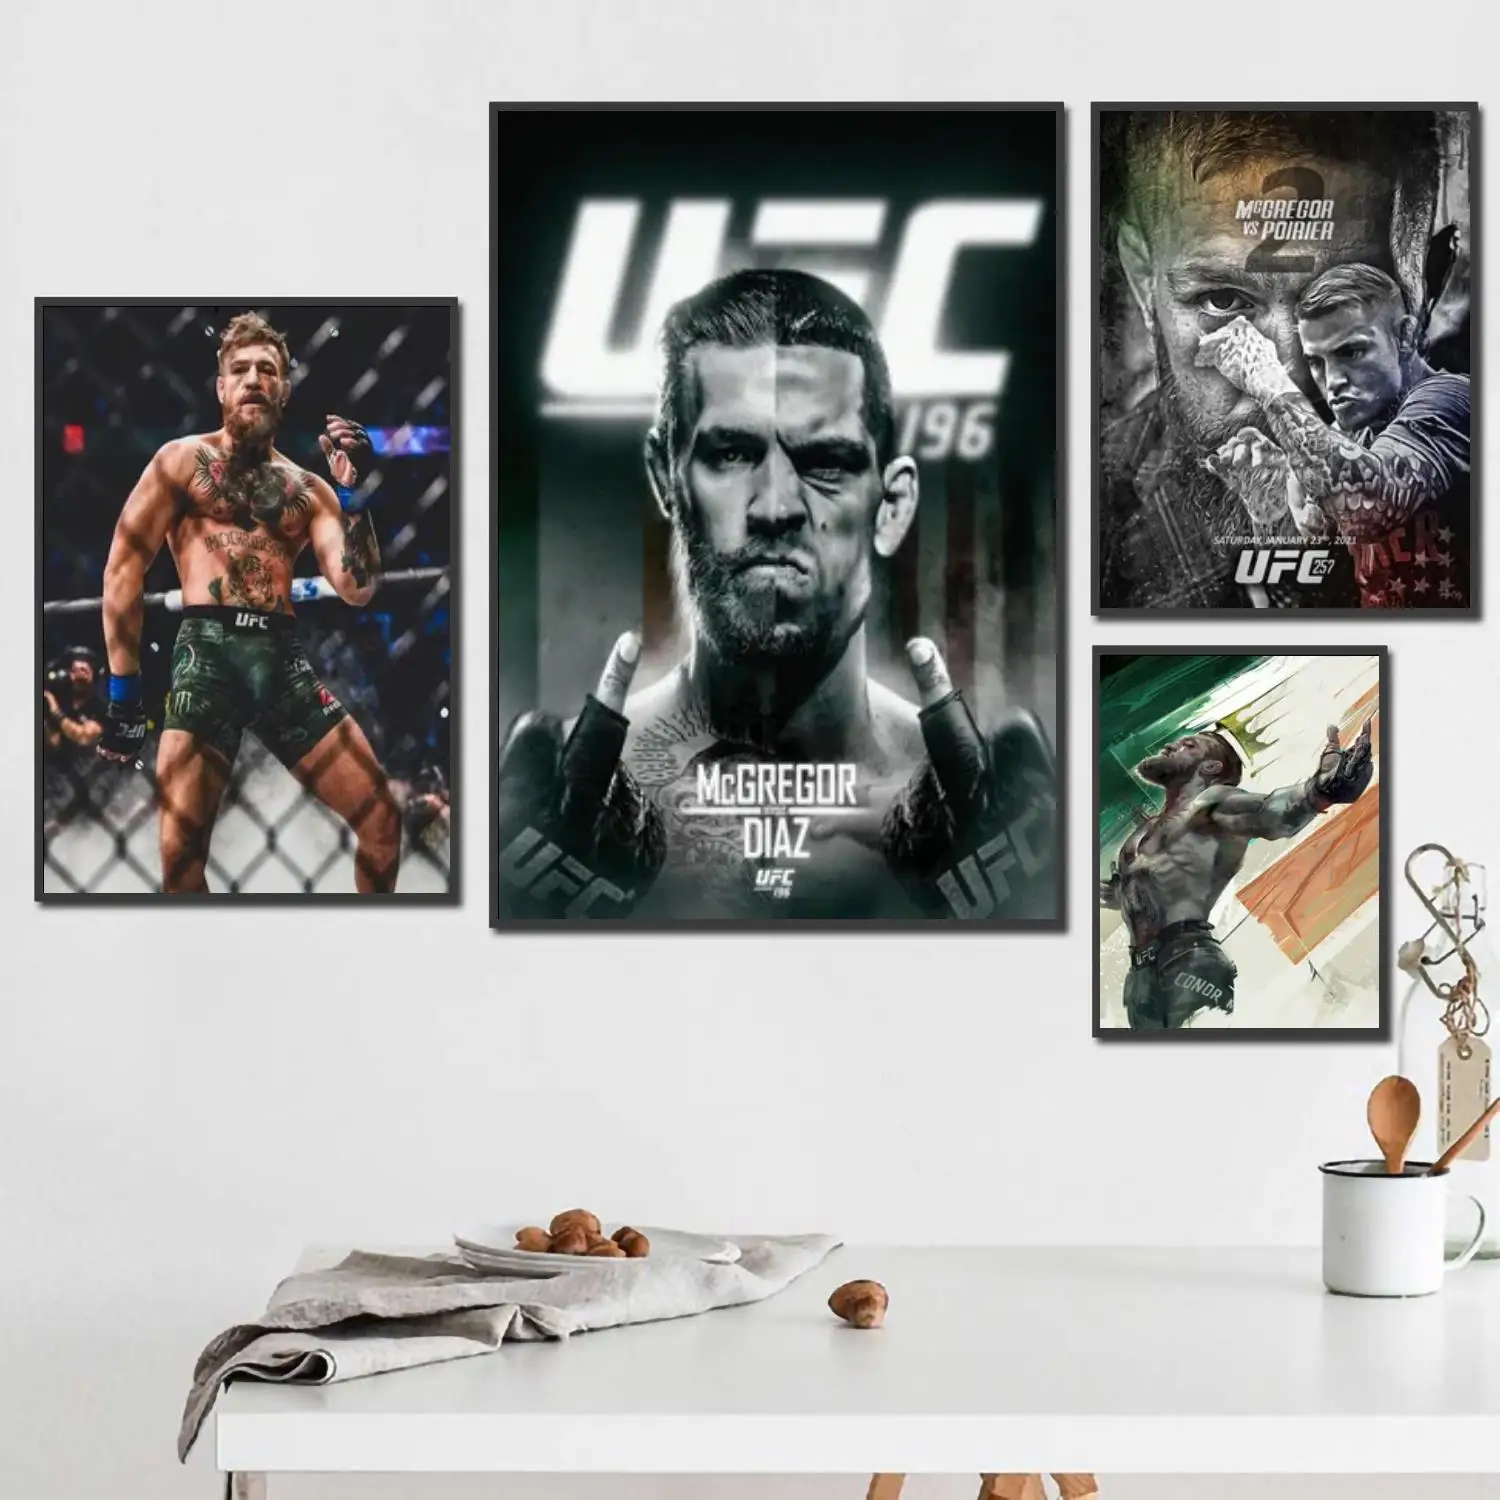 

mcgregor athlete 24x36 Decorative Canvas Posters Room Bar Cafe Decor Gift Print Art Wall Paintings